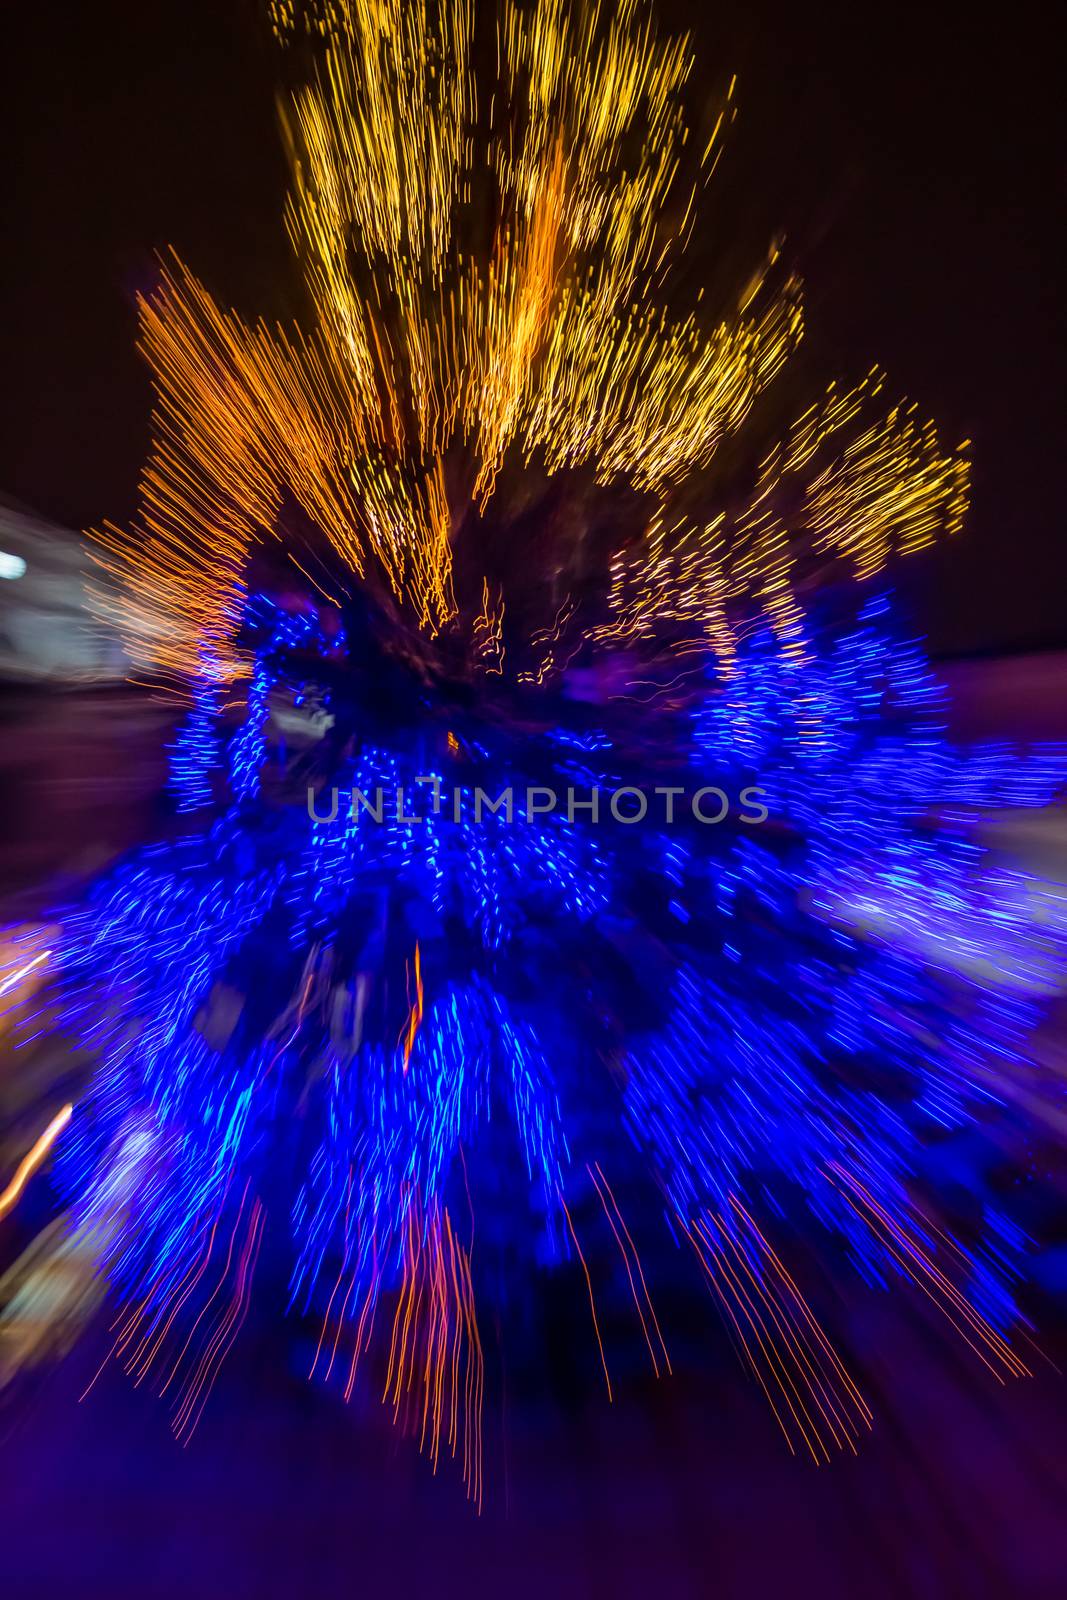 abstraction of blured christmas tree       by Pellinni